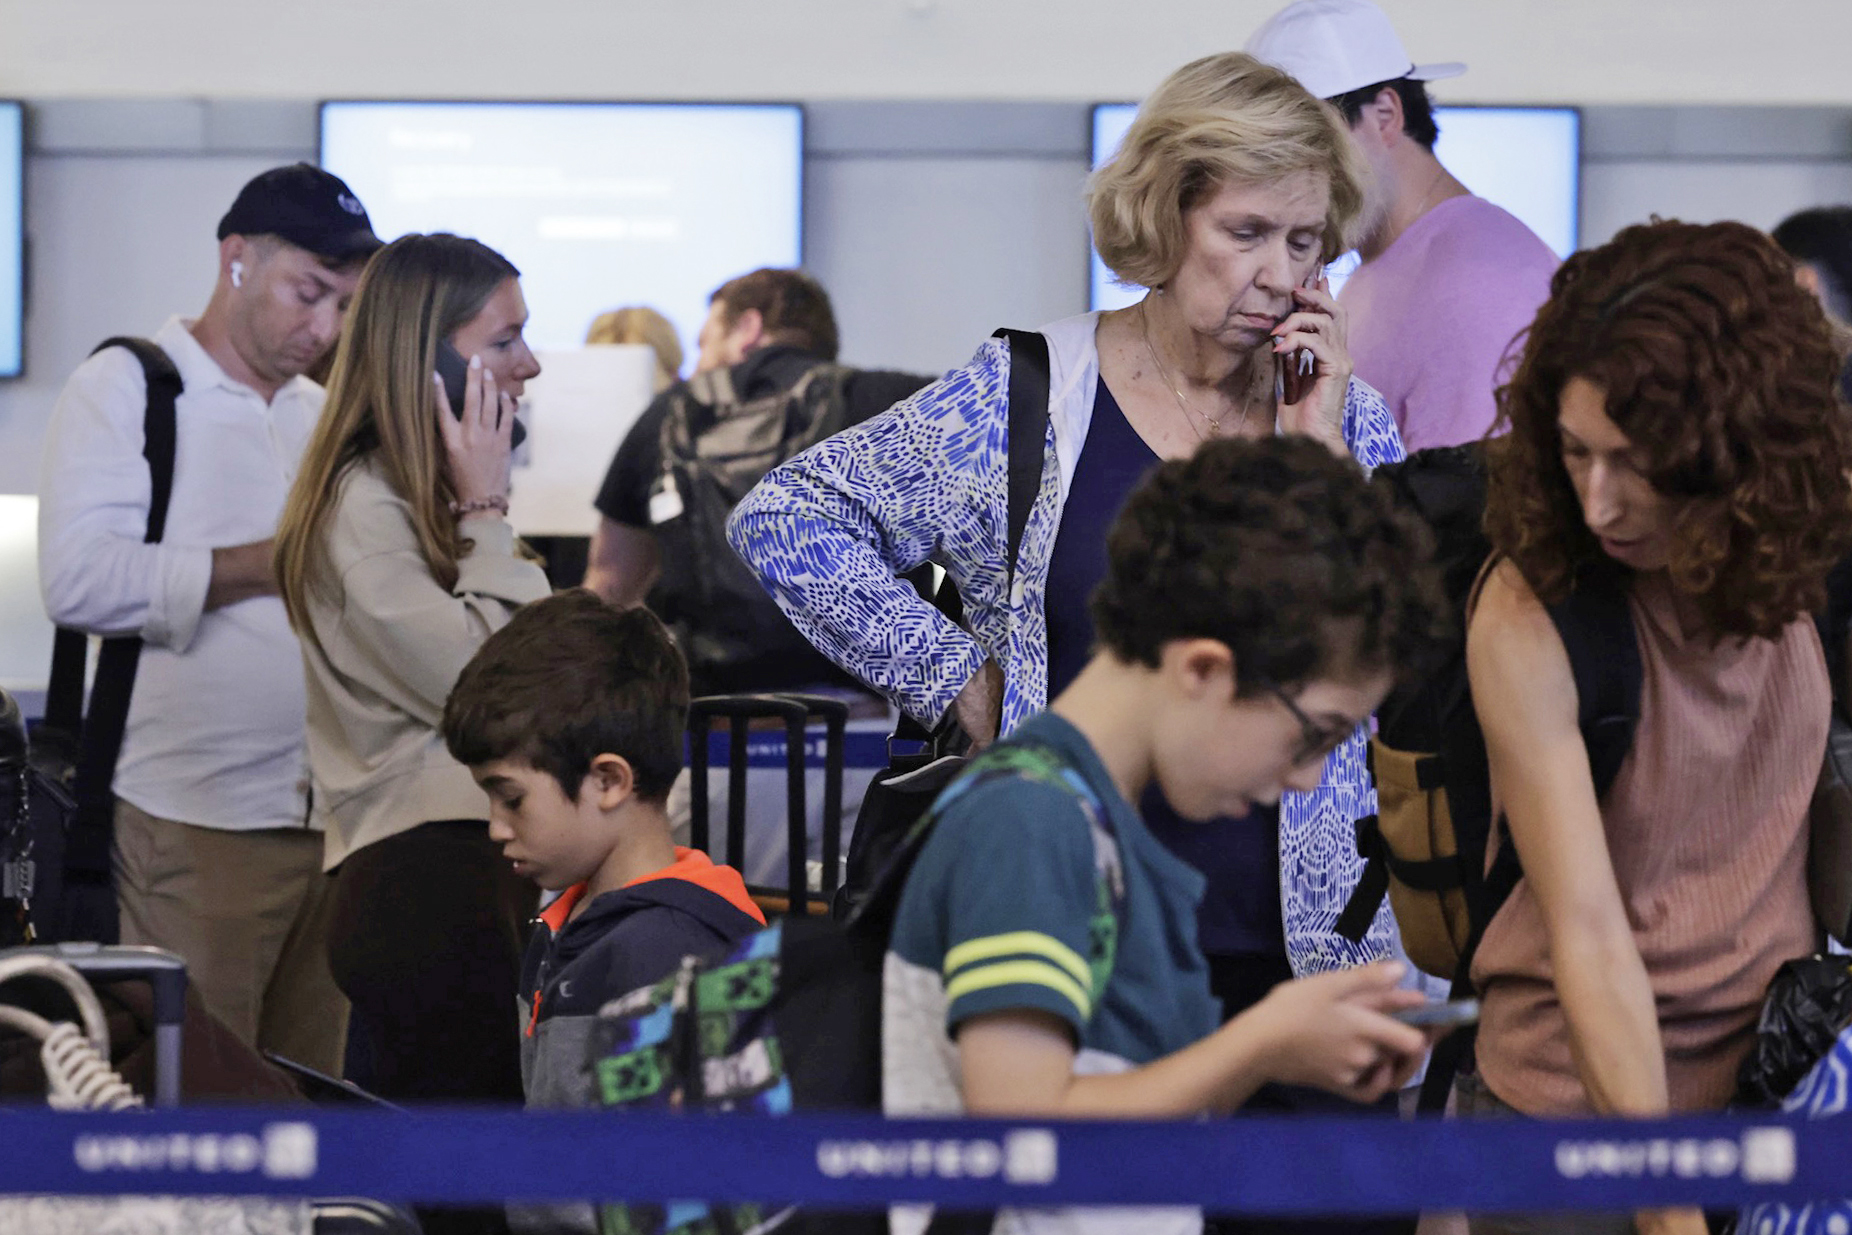 Several people, including children, stand in line at an airport, looking at their phones or talking. They appear focused and some show concern, with luggage nearby.